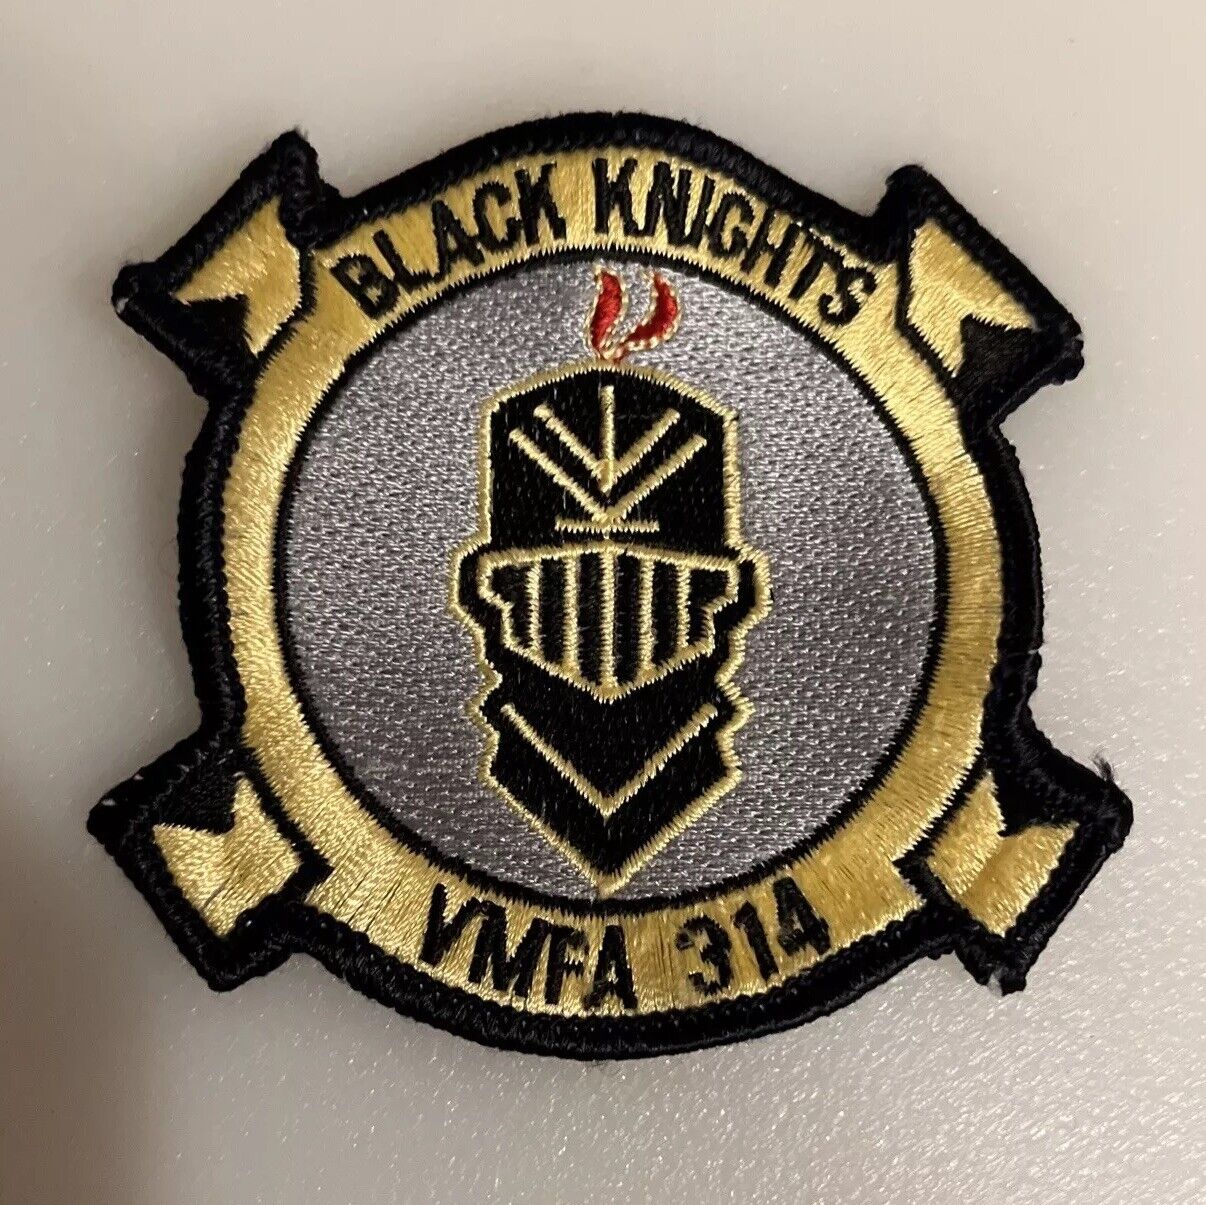 US Navy Black Knights VMFA 314 Woven Patch Military United States USA